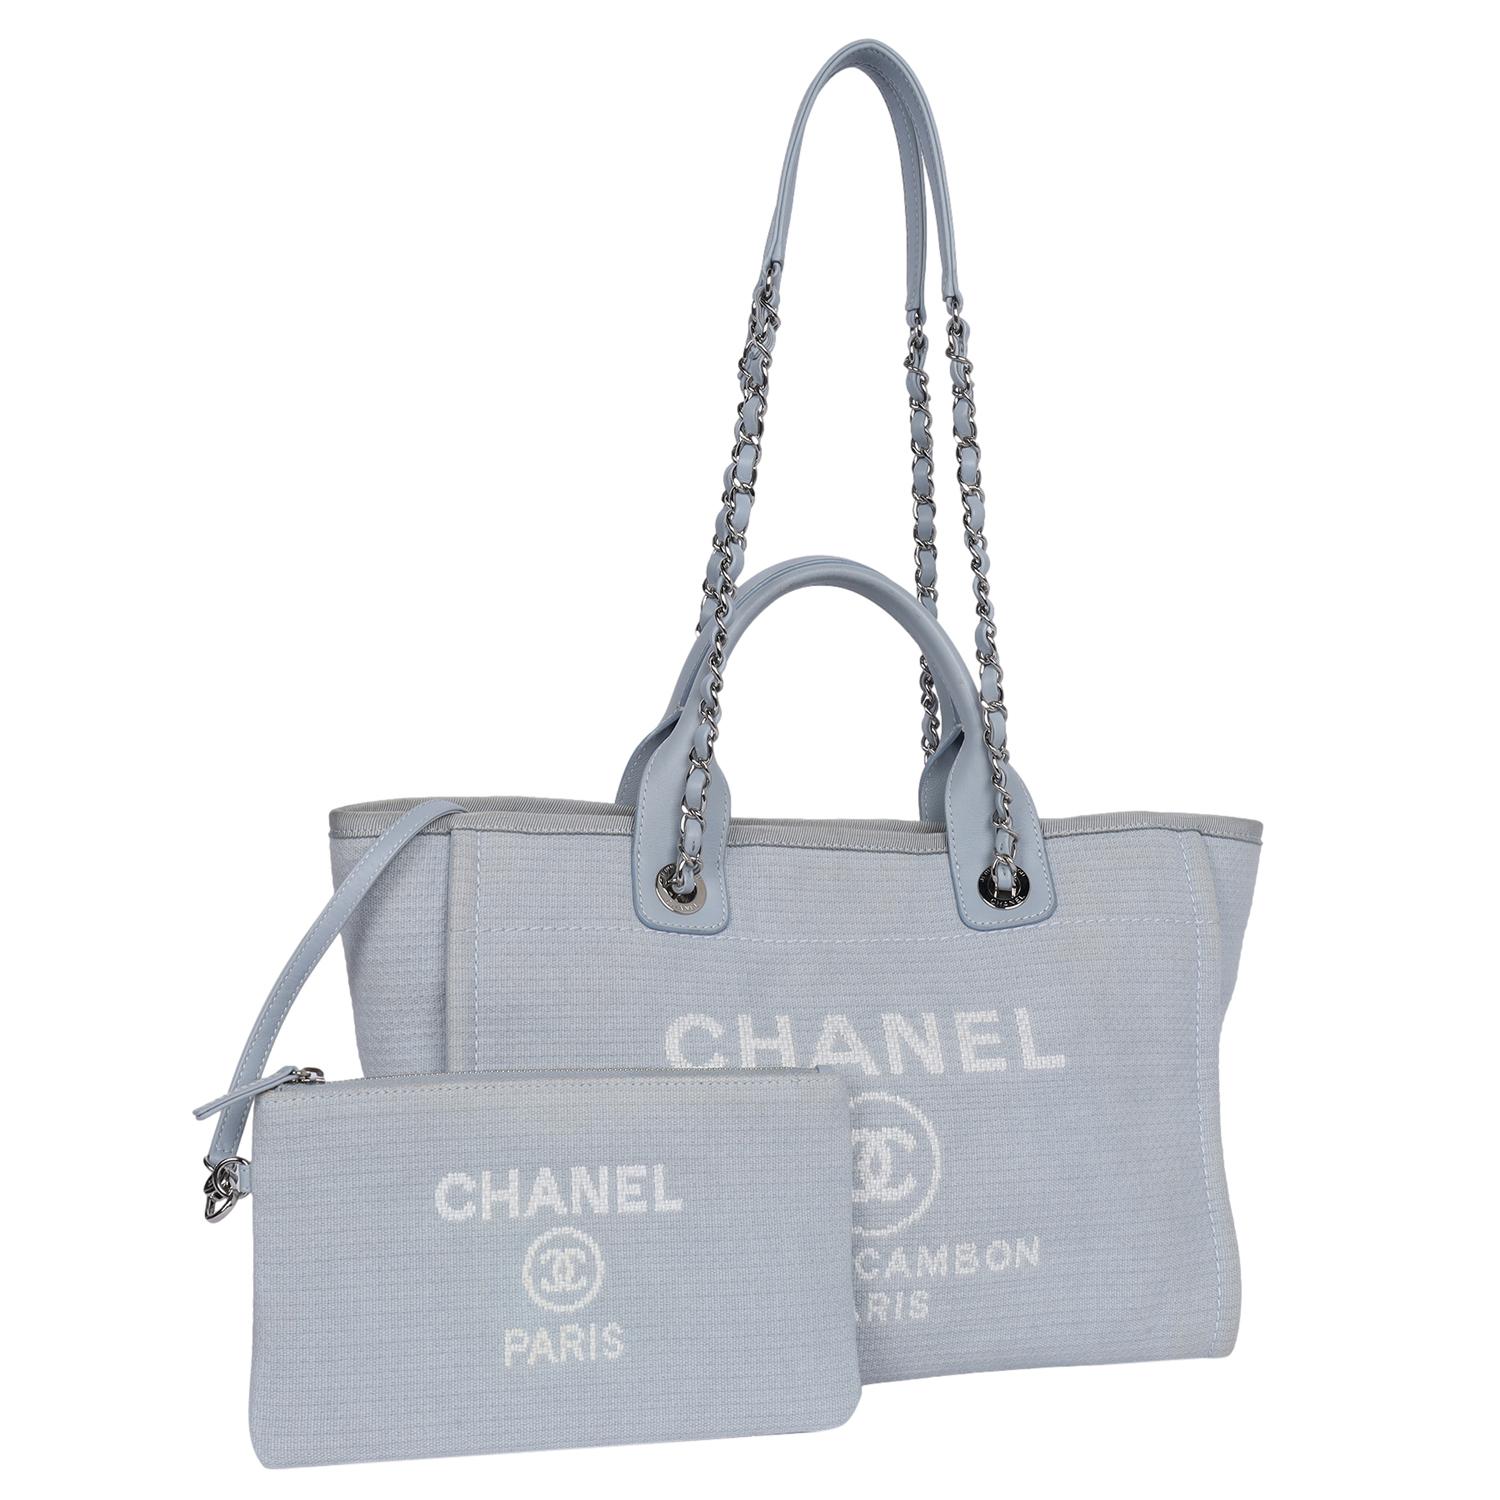 Authentic, pre-loved Chanel Deauville shoulder bag tote. Features baby blue canvas, silver-tone hardware, leather handles with dual shoulder straps with chain-link and blue trim, white embroidered logo embellishment at front face, tonal canvas